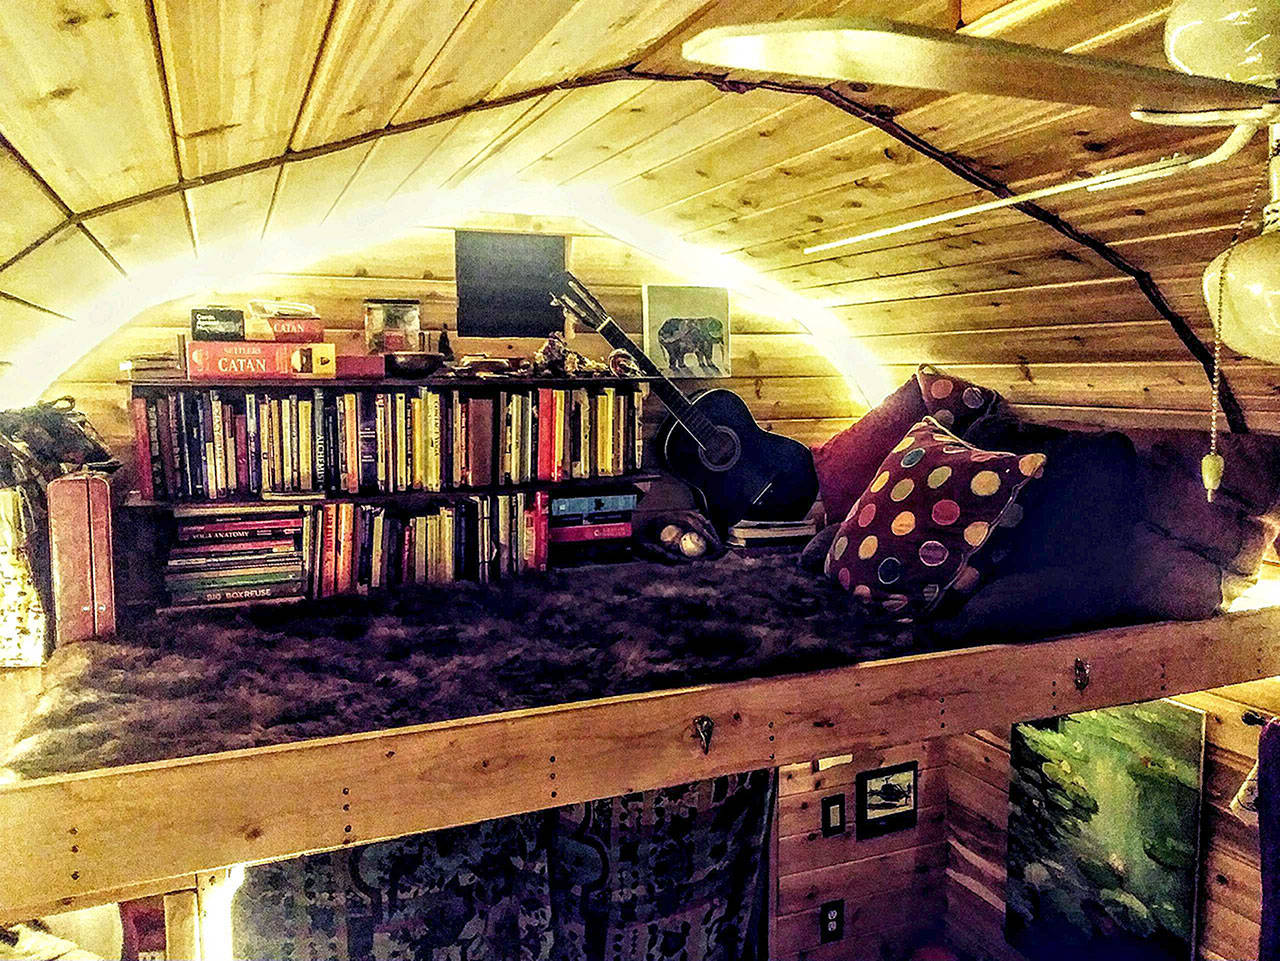 Contributed photo — Though small compared to normal sized houses, tiny homes offer flexibility and design creativity. The loft of a tiny home in Olympia is used for both sleeping space and a book shelf.